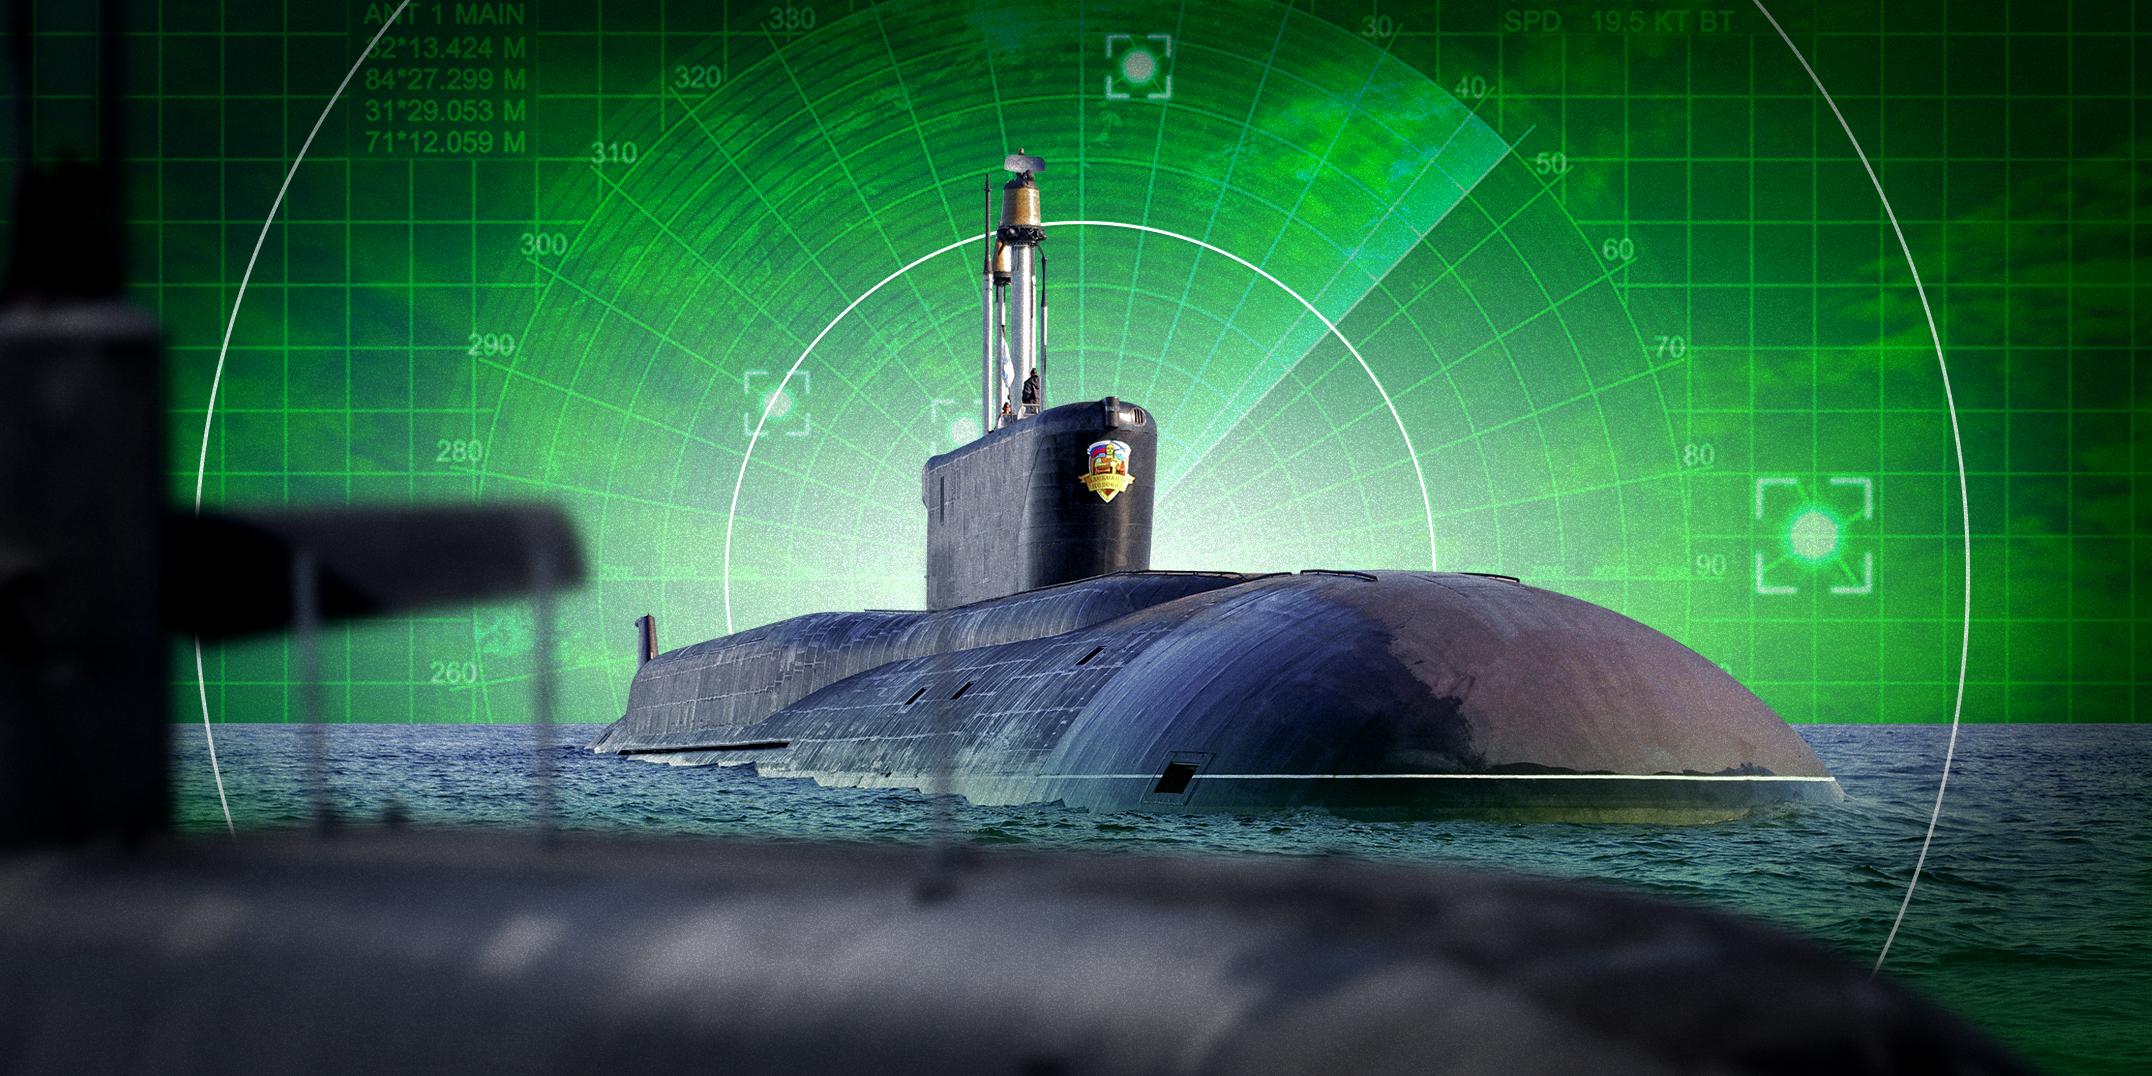 Boreas vs Colombia: how Russia will respond to the new generation submarine from the United States